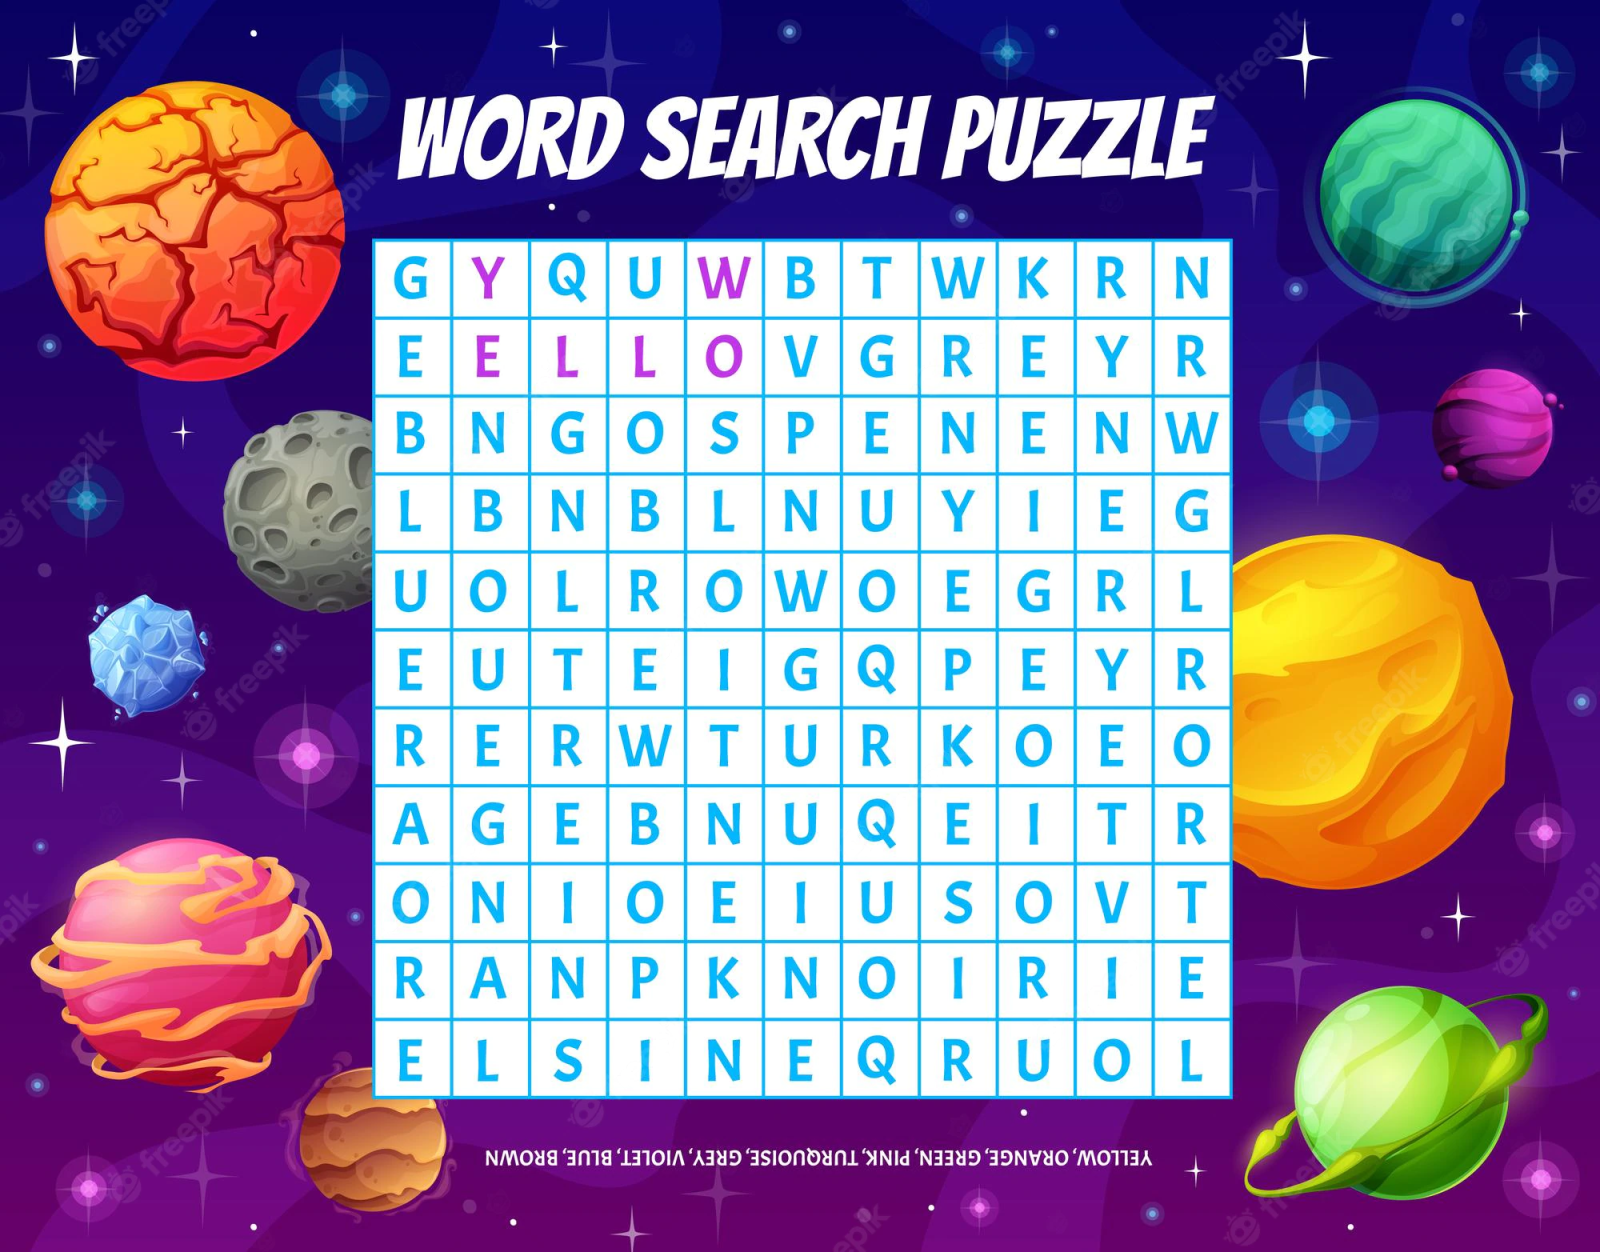 Word Puzzle Games